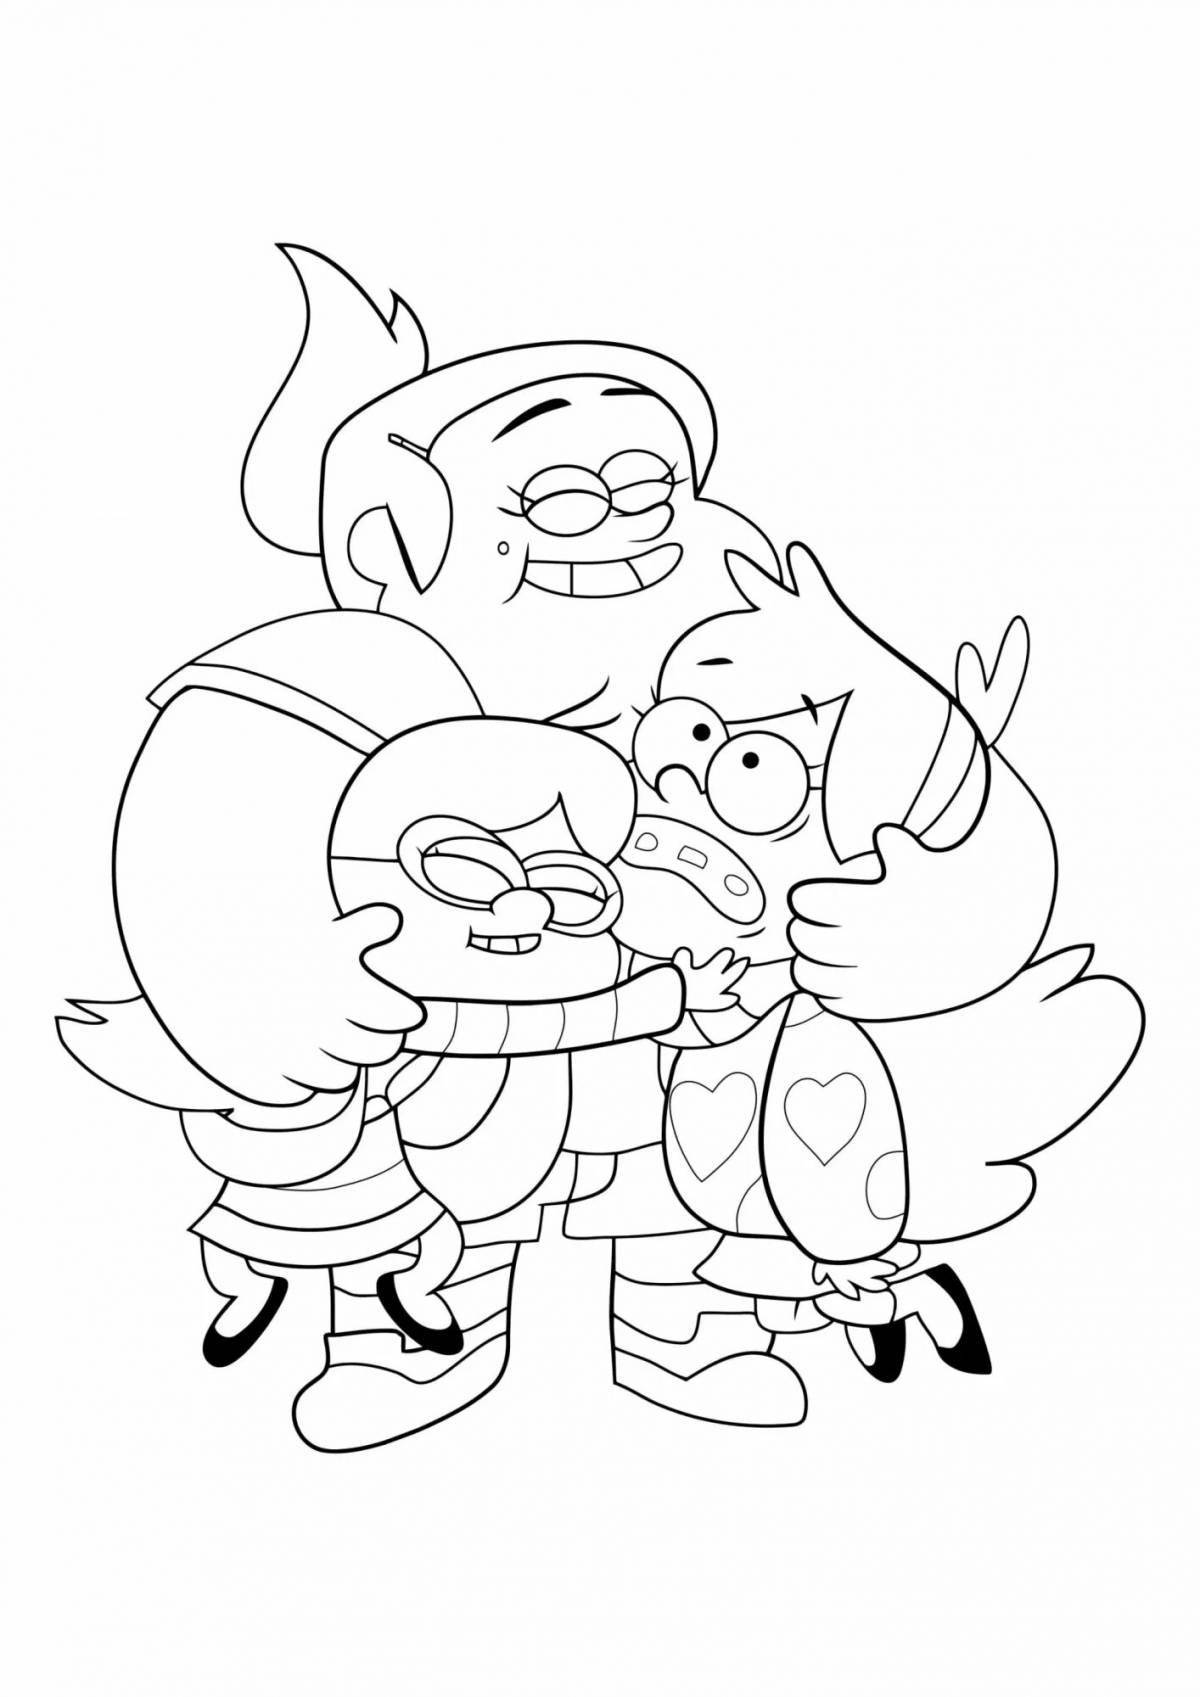 Gravity falls exciting couple